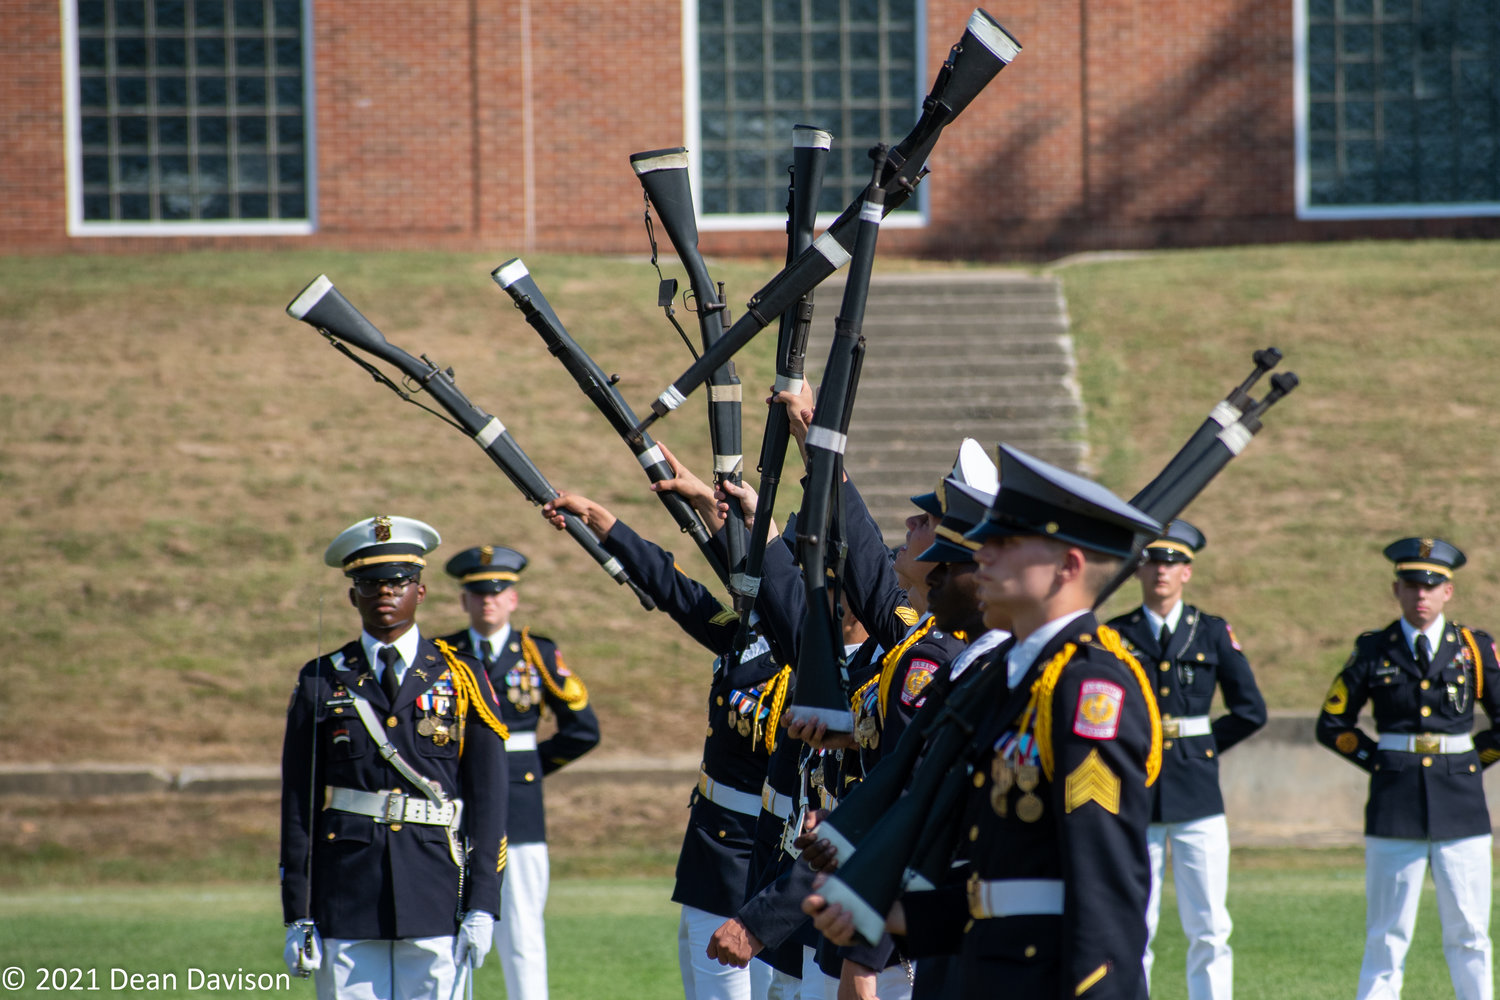 Missouri Military Academy’s Fusileer Drill Team displayed their skill, precision and teamwork during a MMA Homecoming exhibition performance on campus in Sept. 2021.